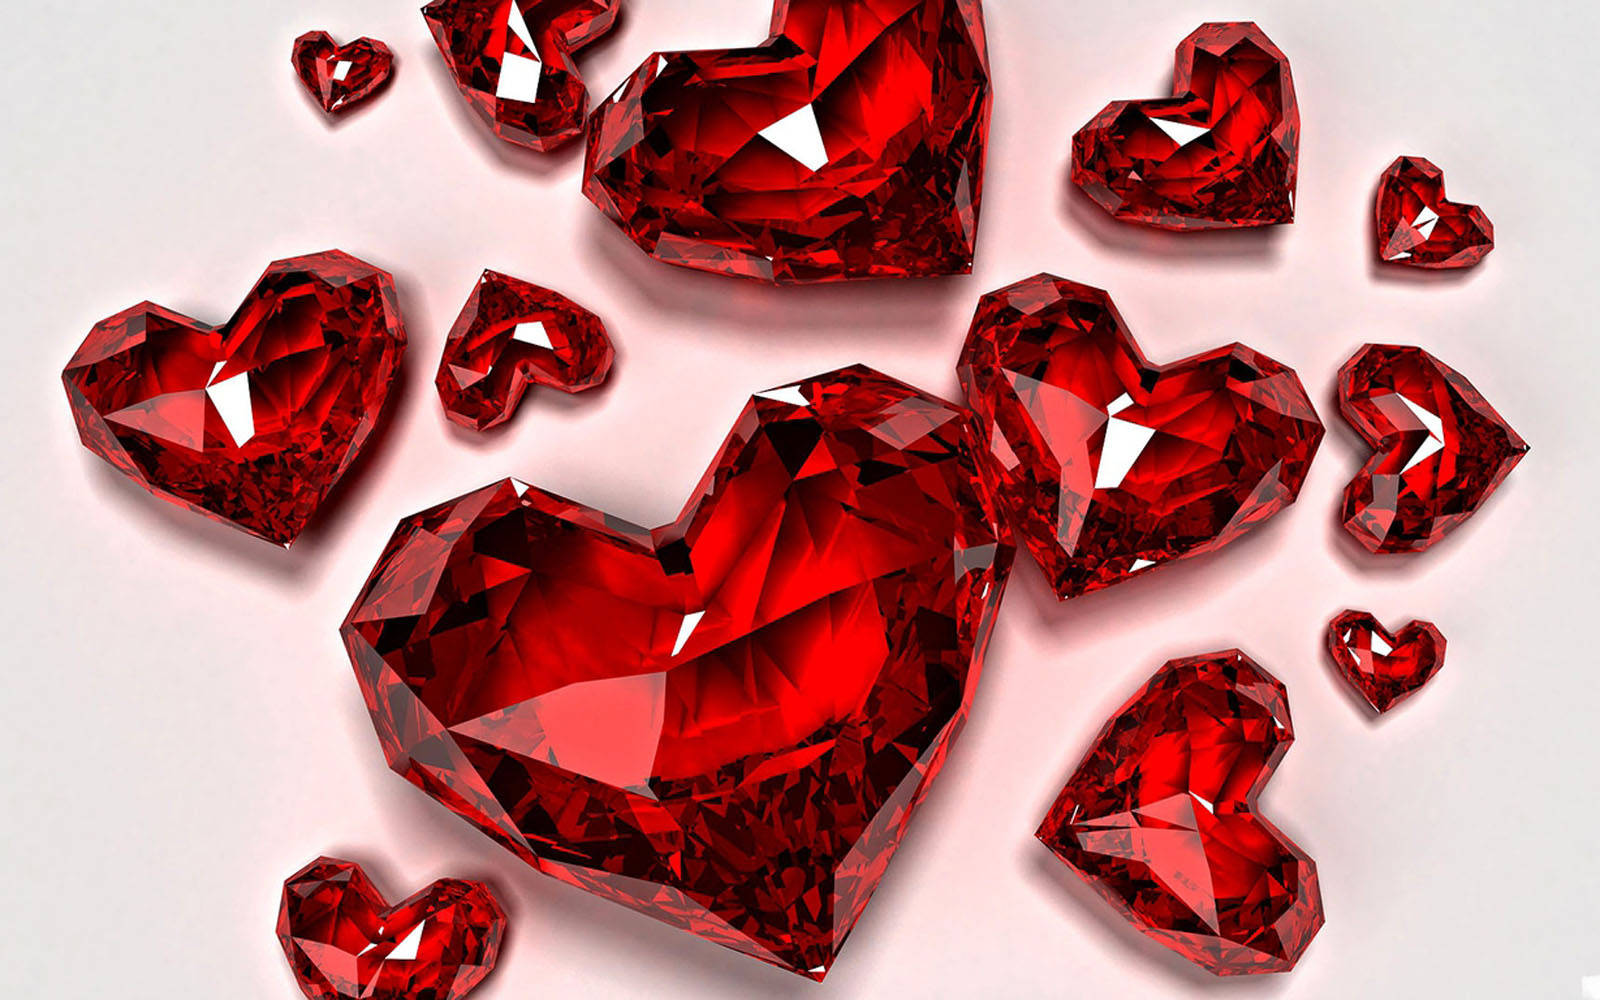 Red Crystal Glam Hearts Wallpaper